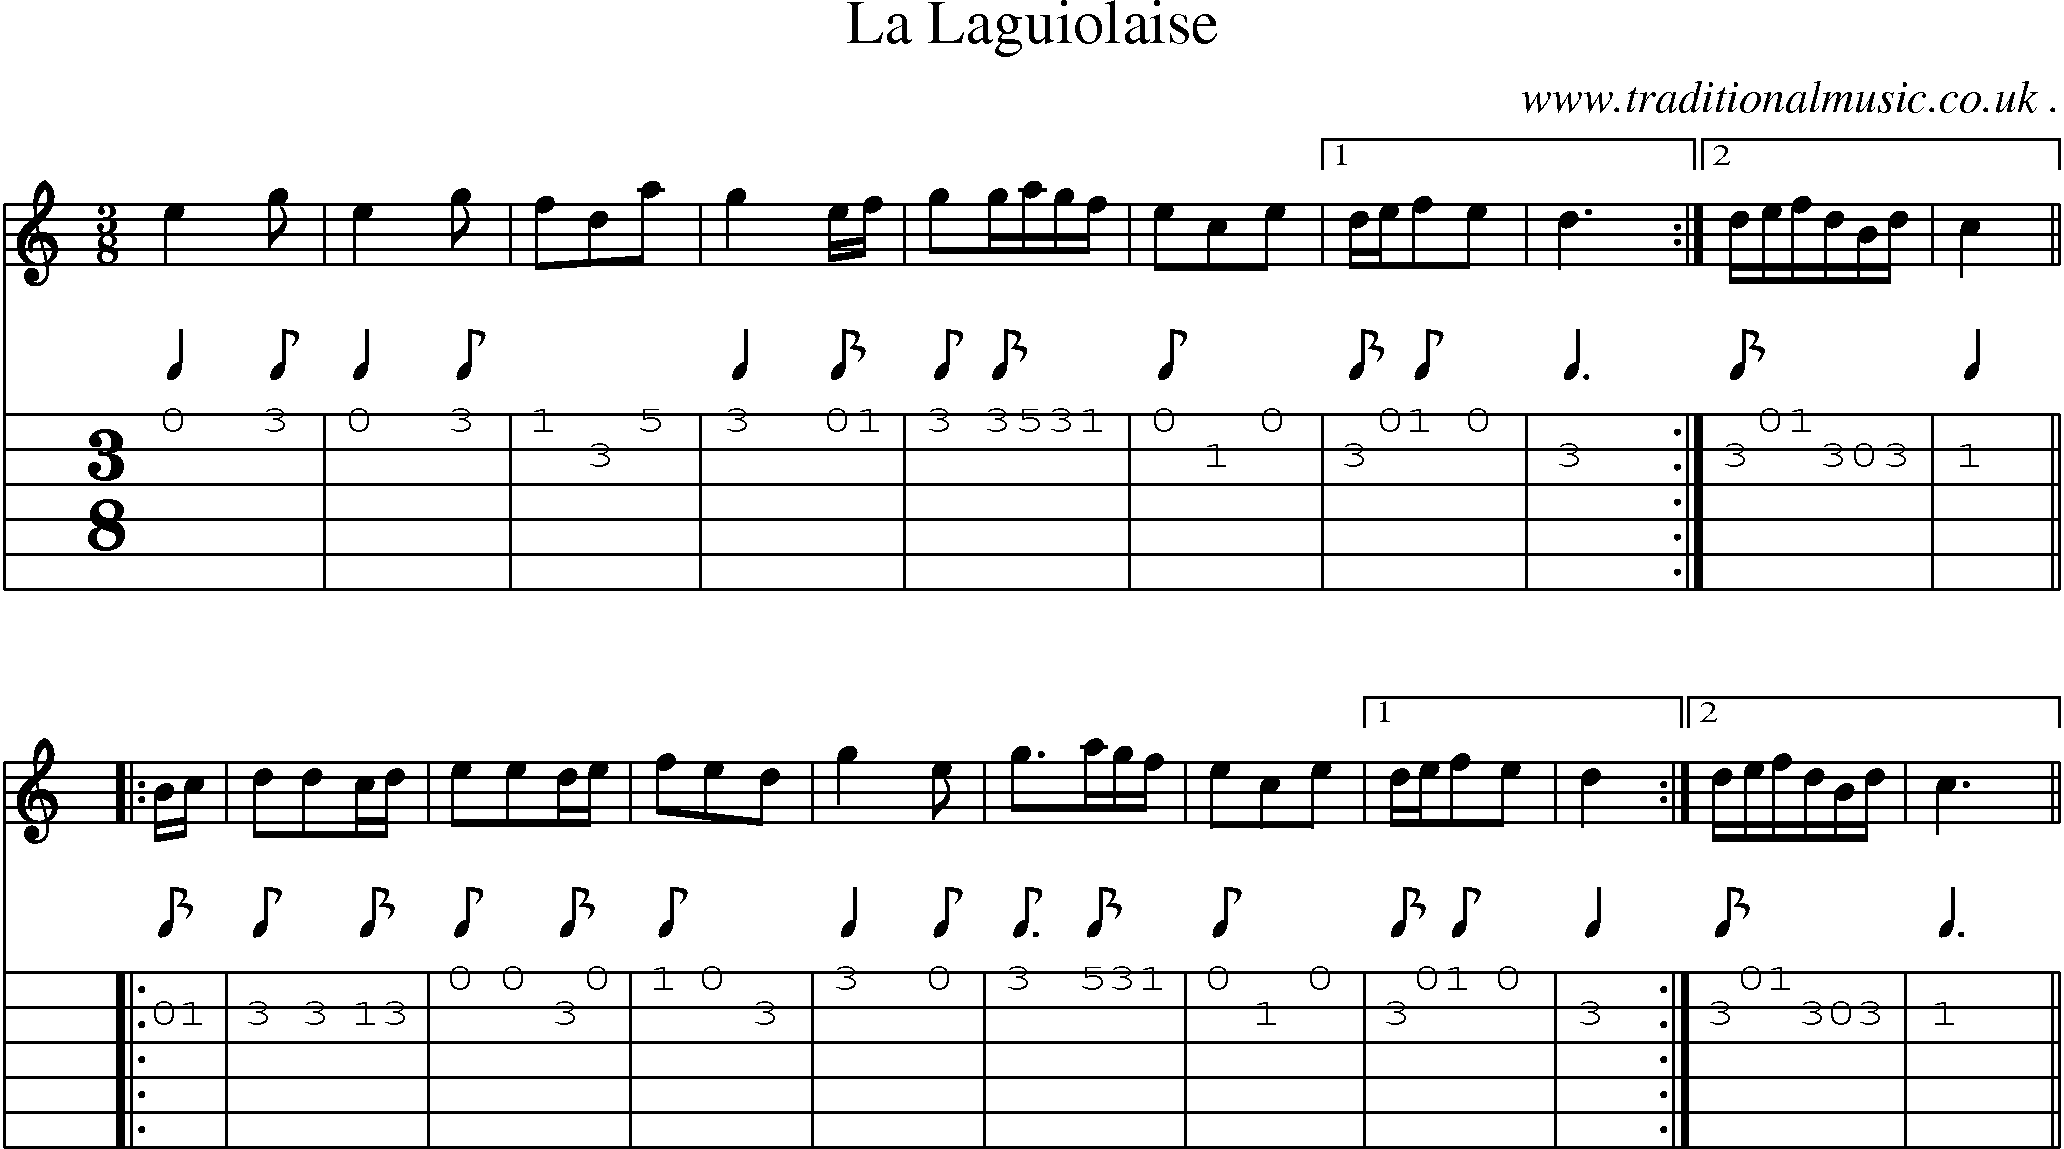 Sheet-Music and Guitar Tabs for La Laguiolaise